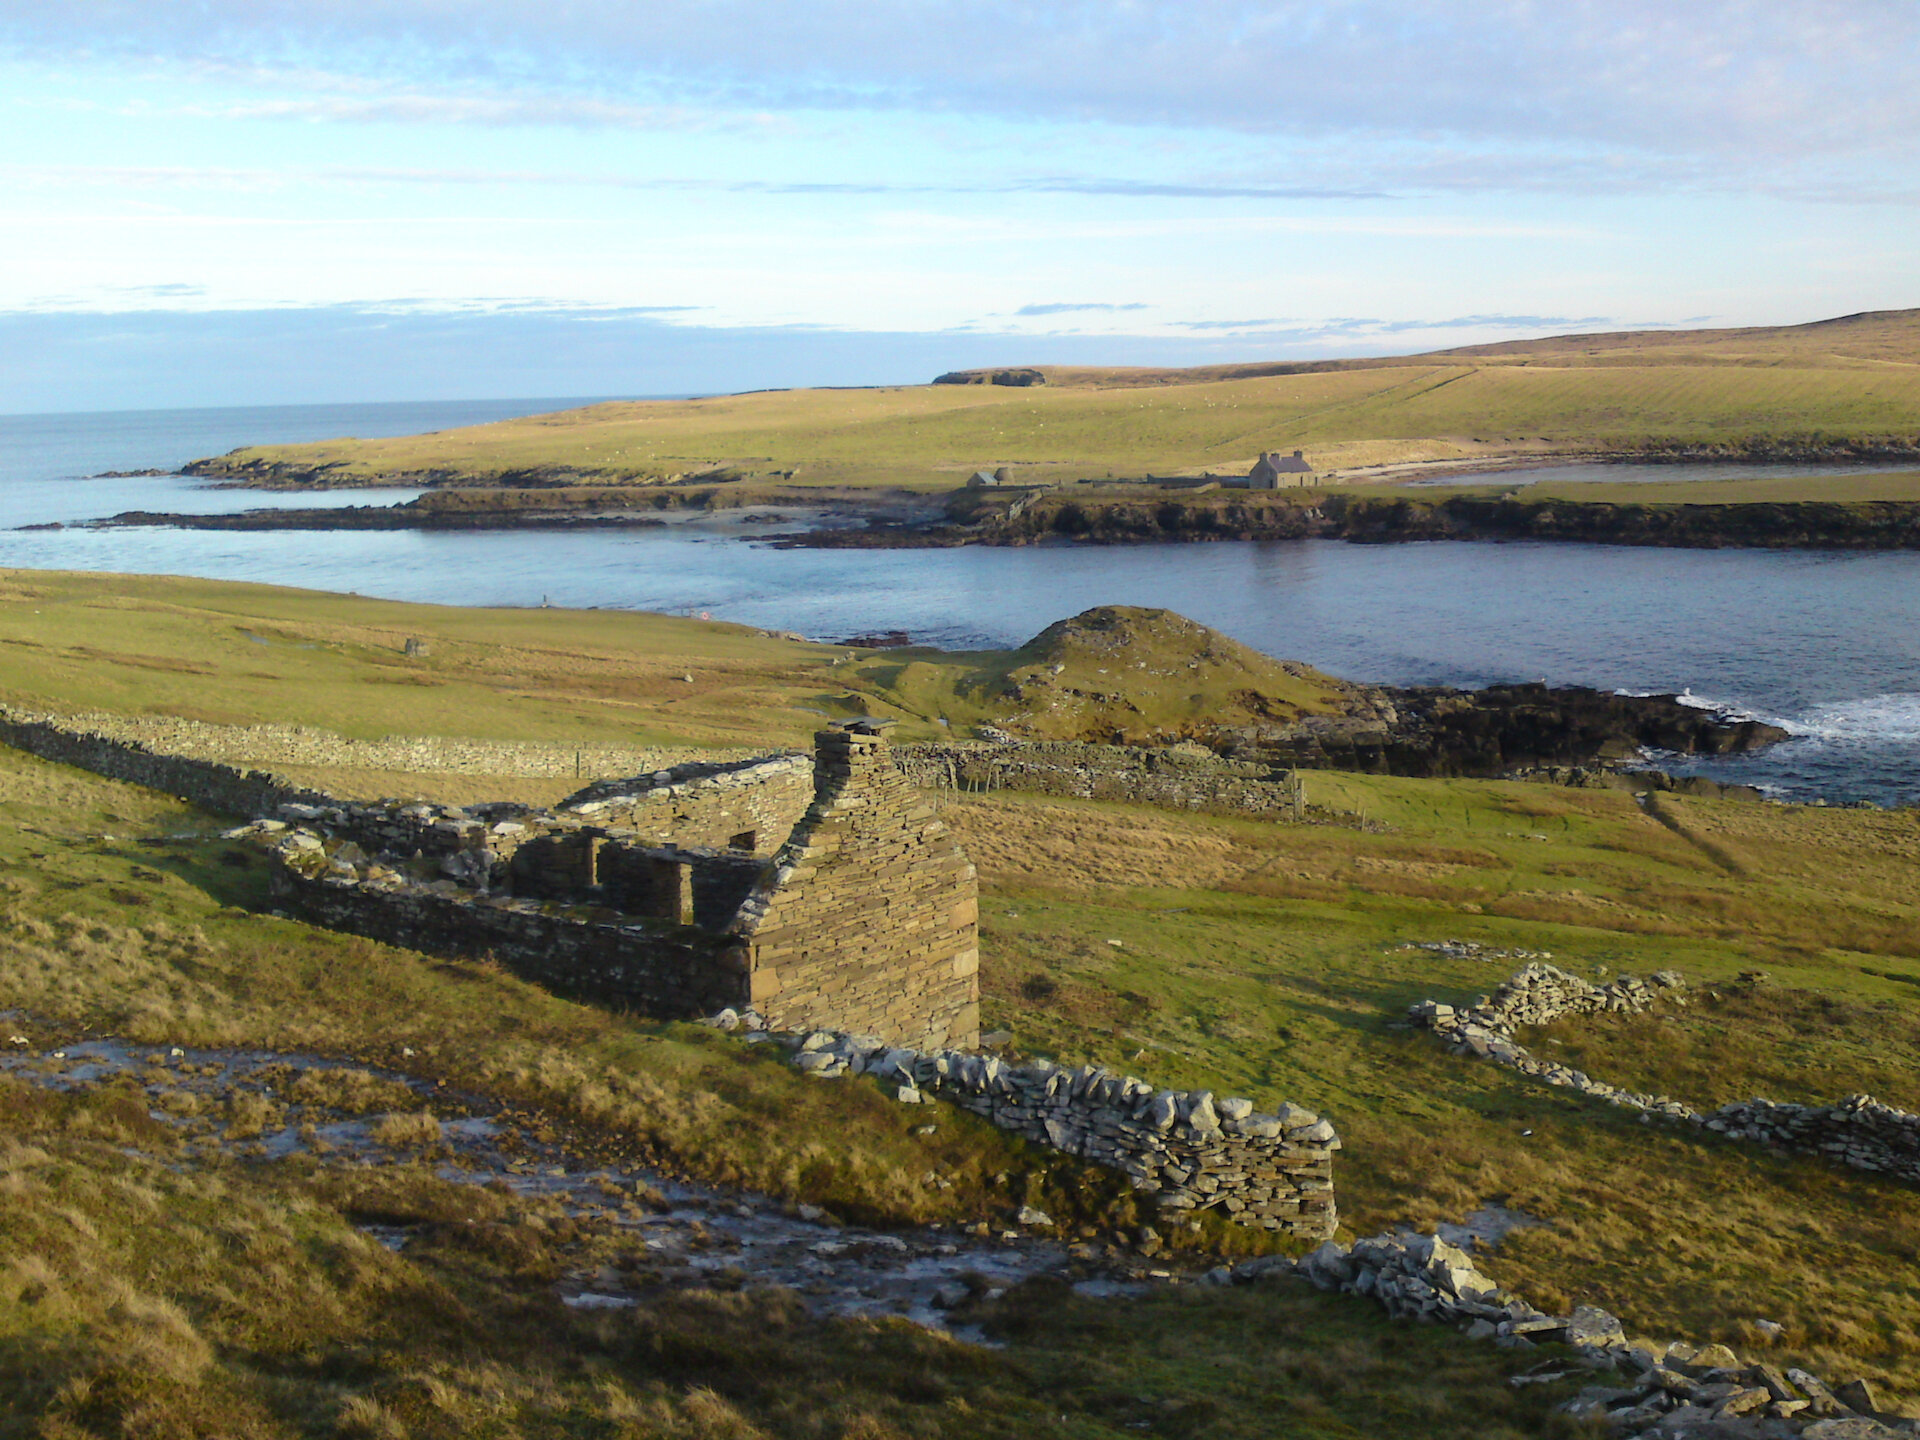 A stone-built coastal Iron Age broch alongside more recent drystone structures and enclosures at Noss Sound, Bressay.